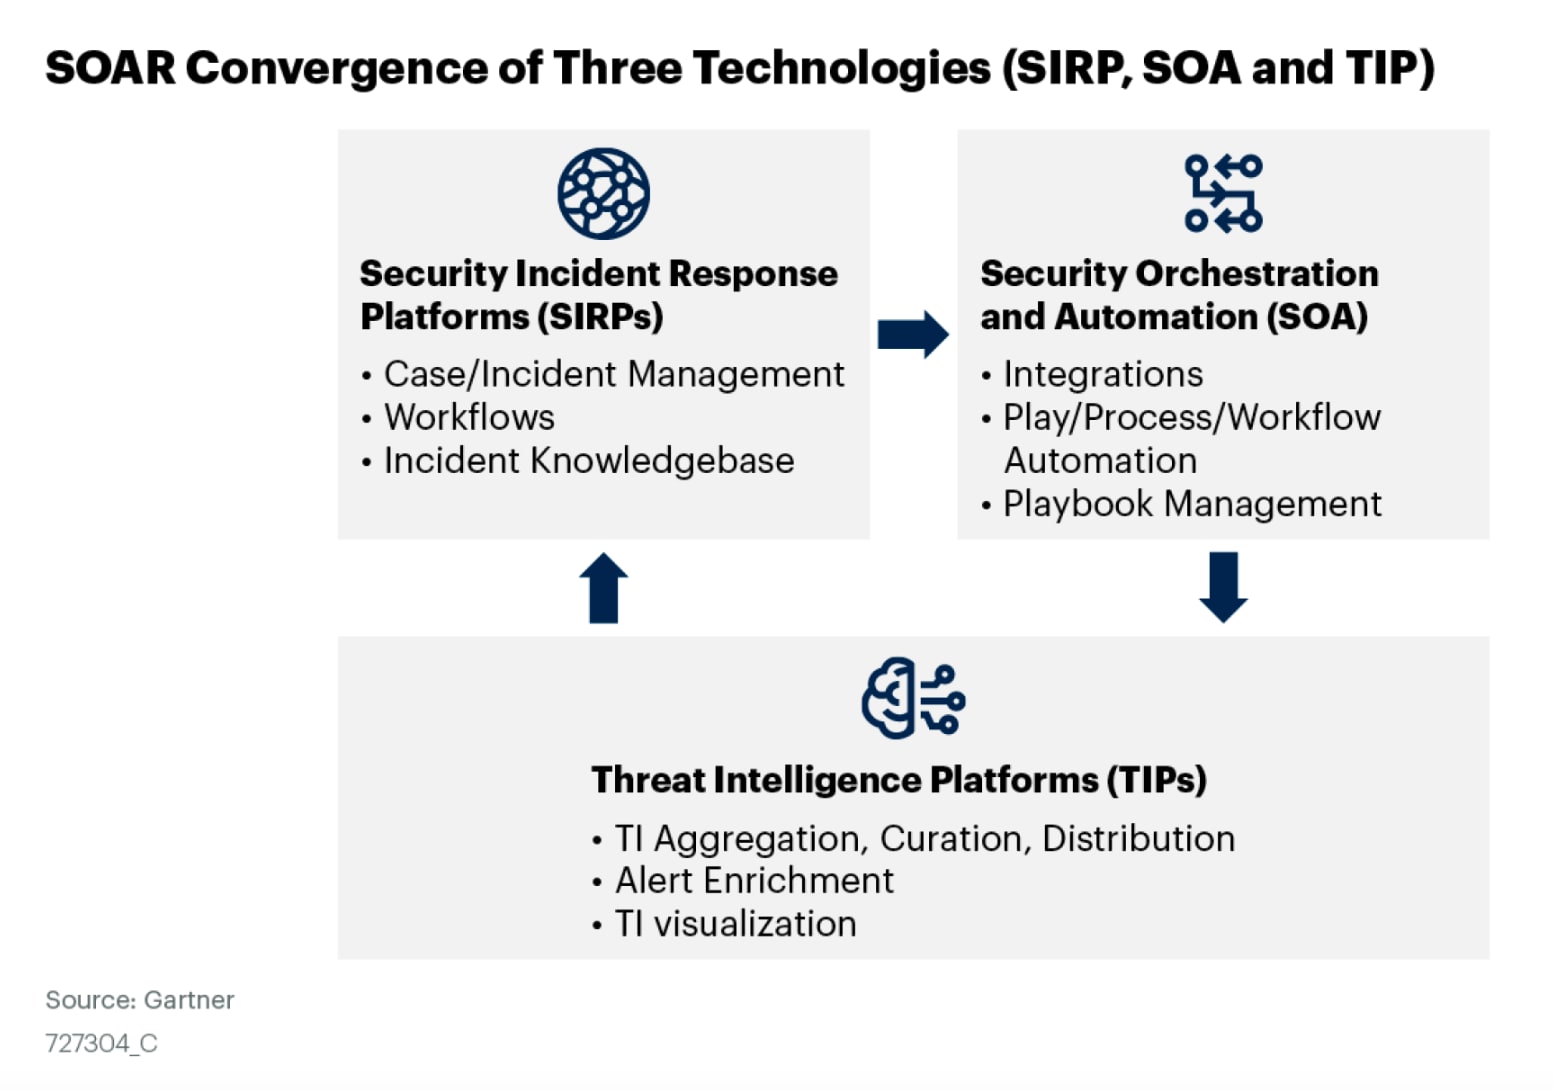 The screenshot shows how SOAR solutions converge three technologies: Security Incident Response Platforms (SIRP) (case/incident management, workflows, incident knowledgebase), Security Orchestration and Automation (SOA) (integrations, play/process/workflow automation, playbook management) and Threat Intelligence Platforms (TIPs) (TI Aggregation, curation, distribution, alert enrichment, TI visualization). Source: Gartner